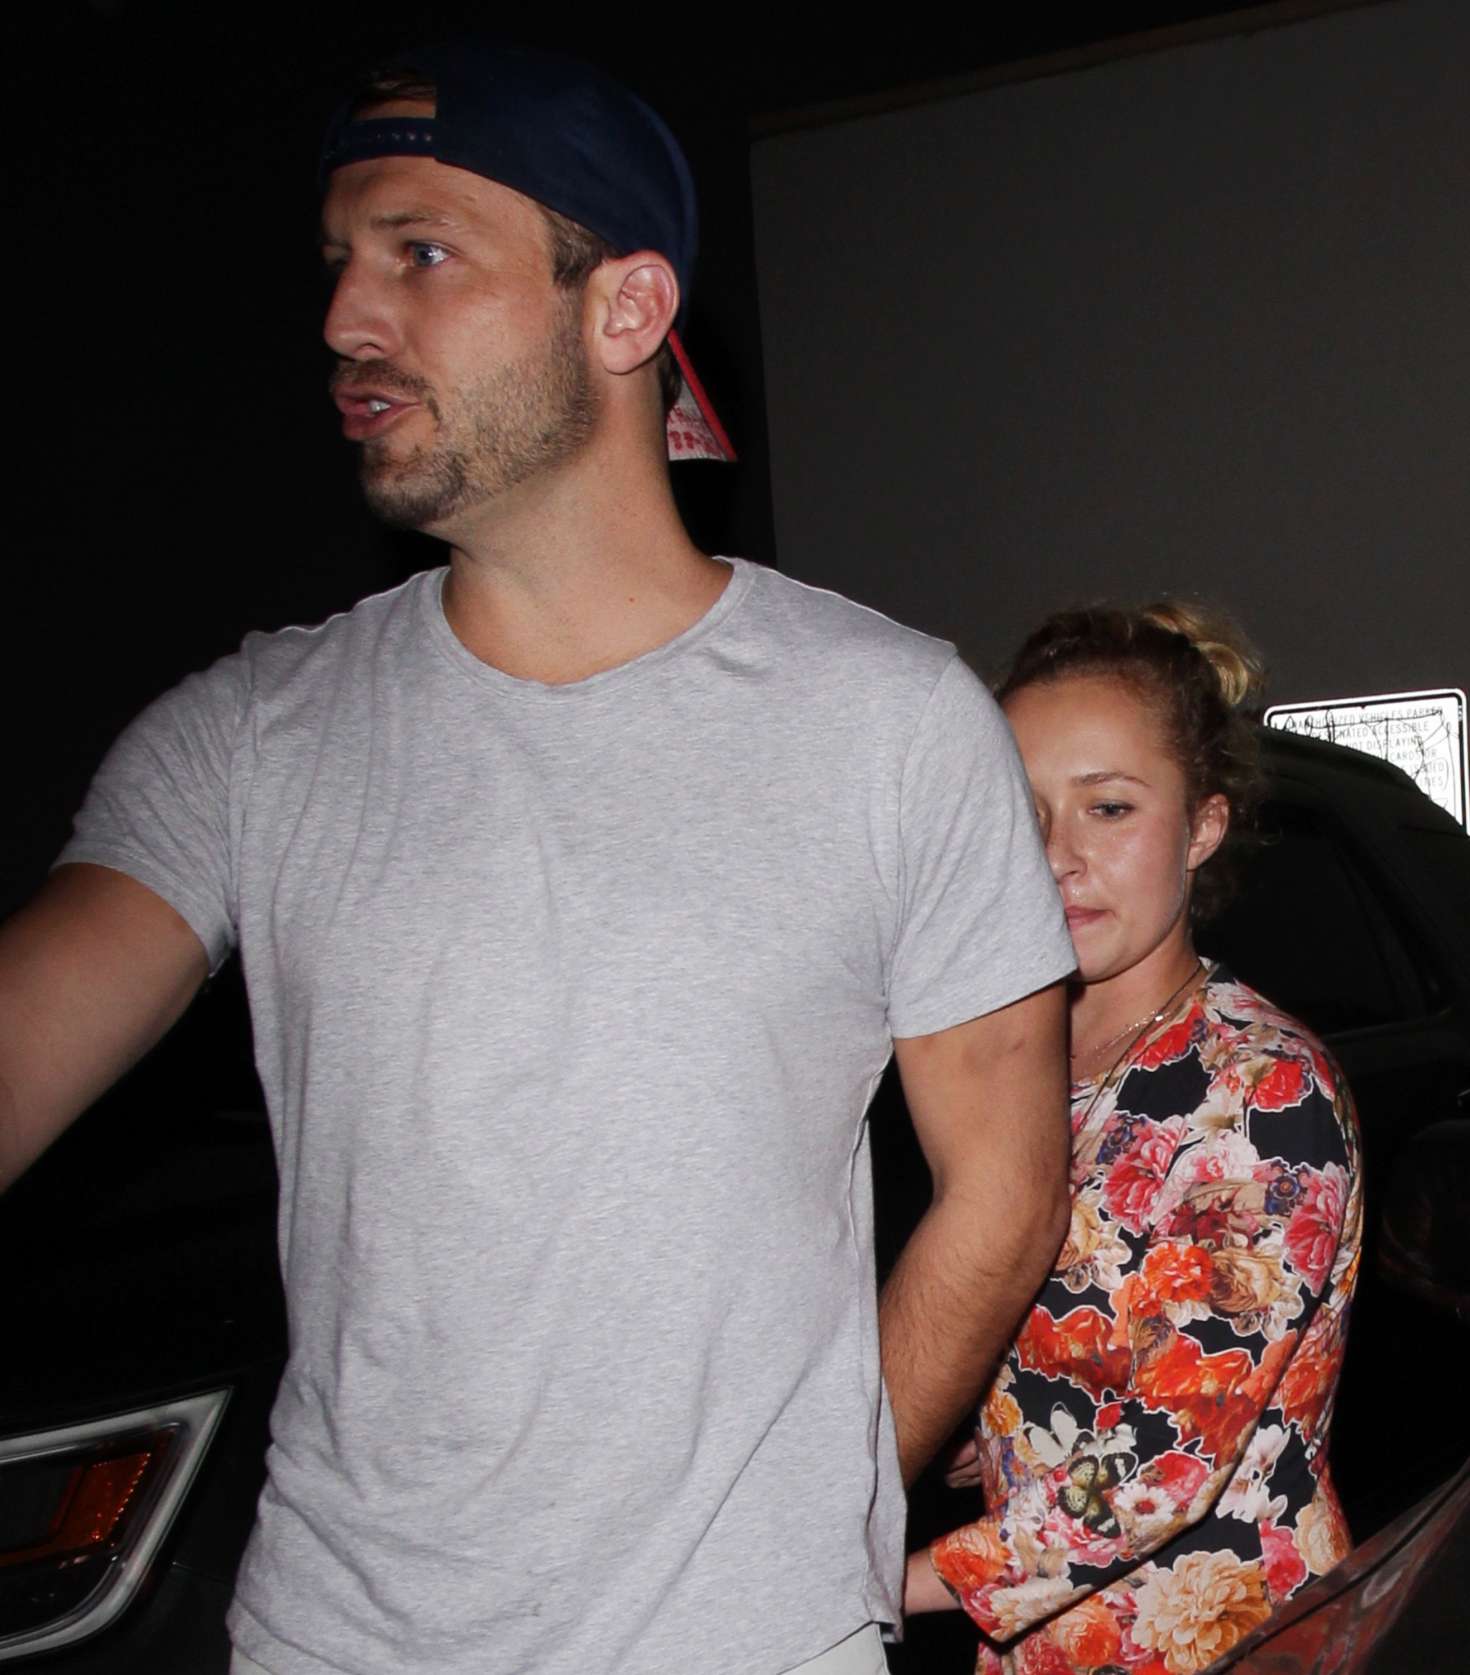 Hayden Panettiere in Floral Dress â€“ Leaves restaurant in Hollywood